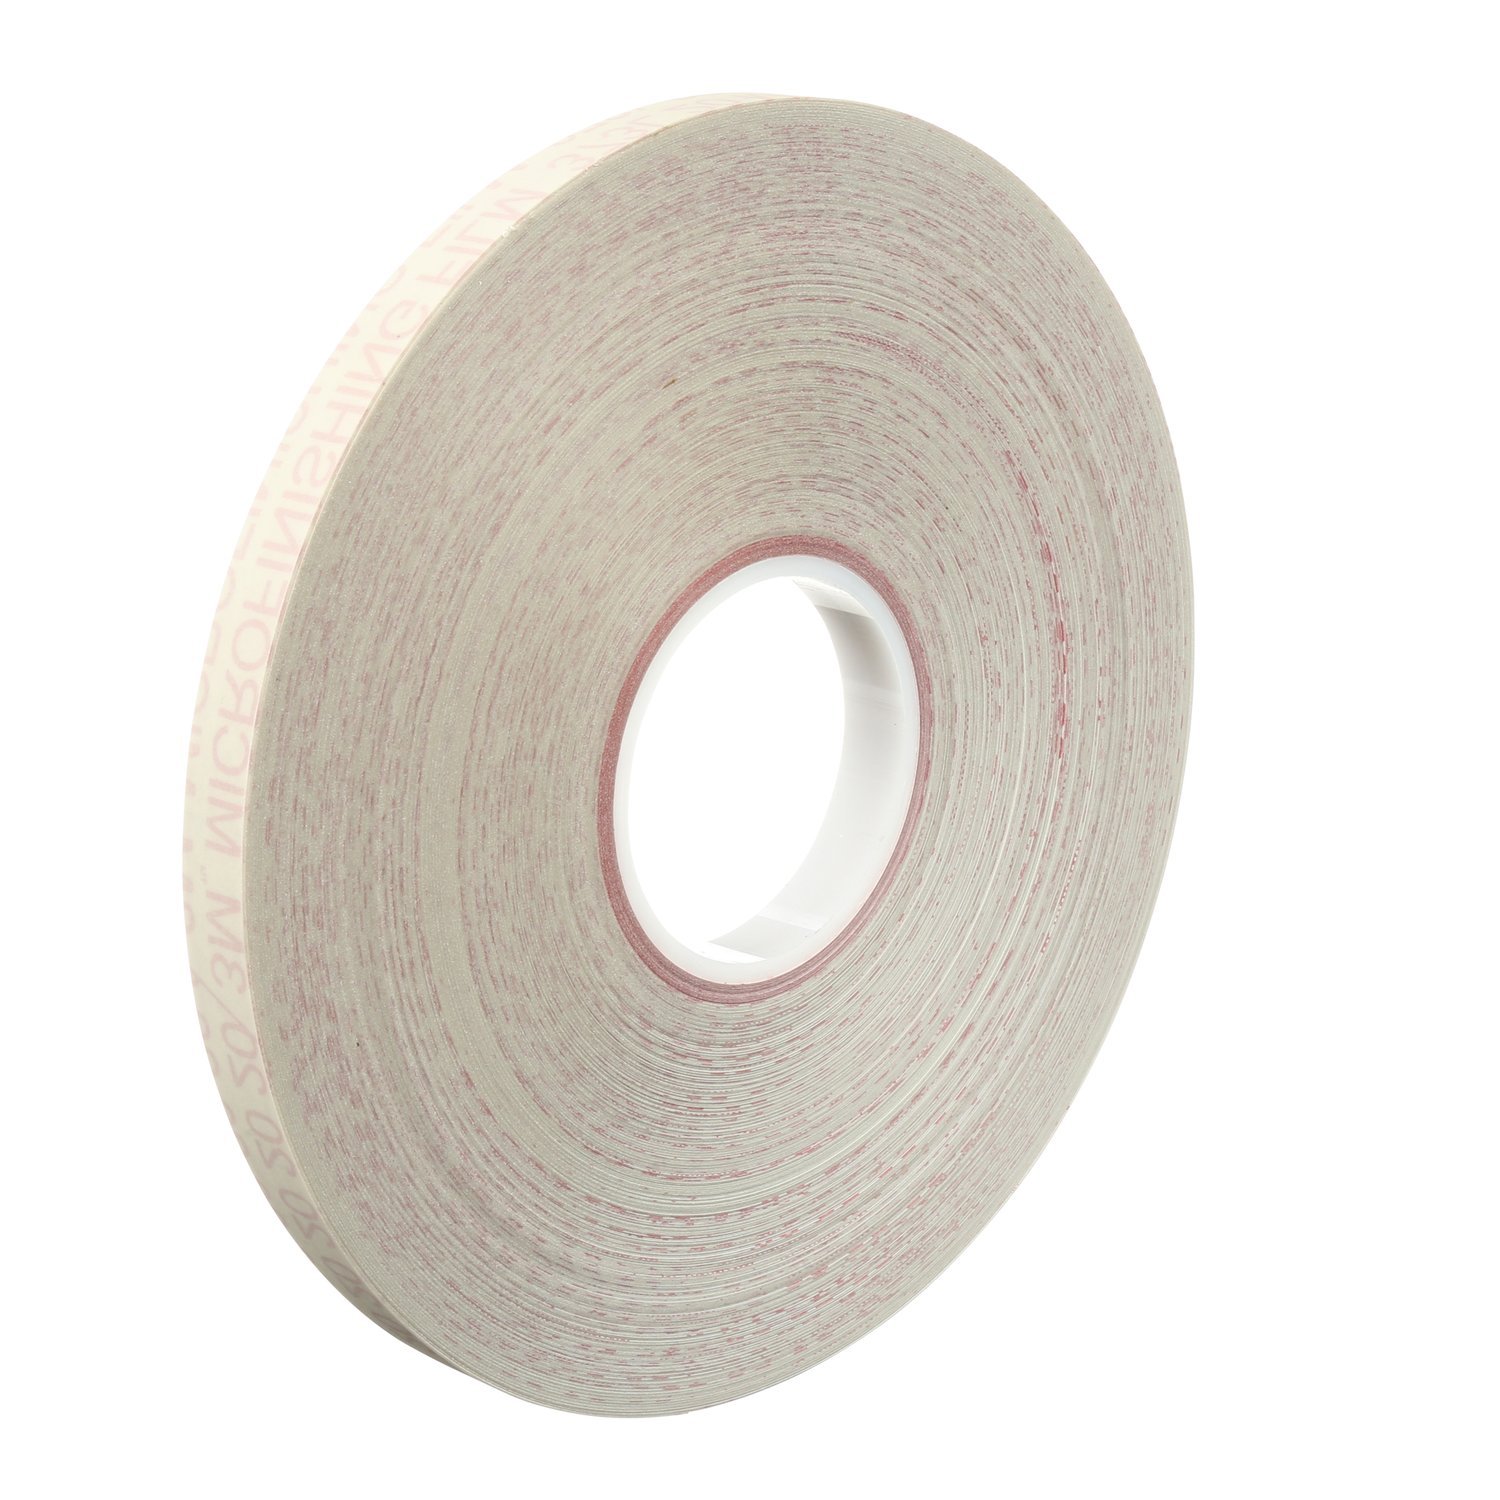 Silicone Release Paper 1240mm x 25m roll